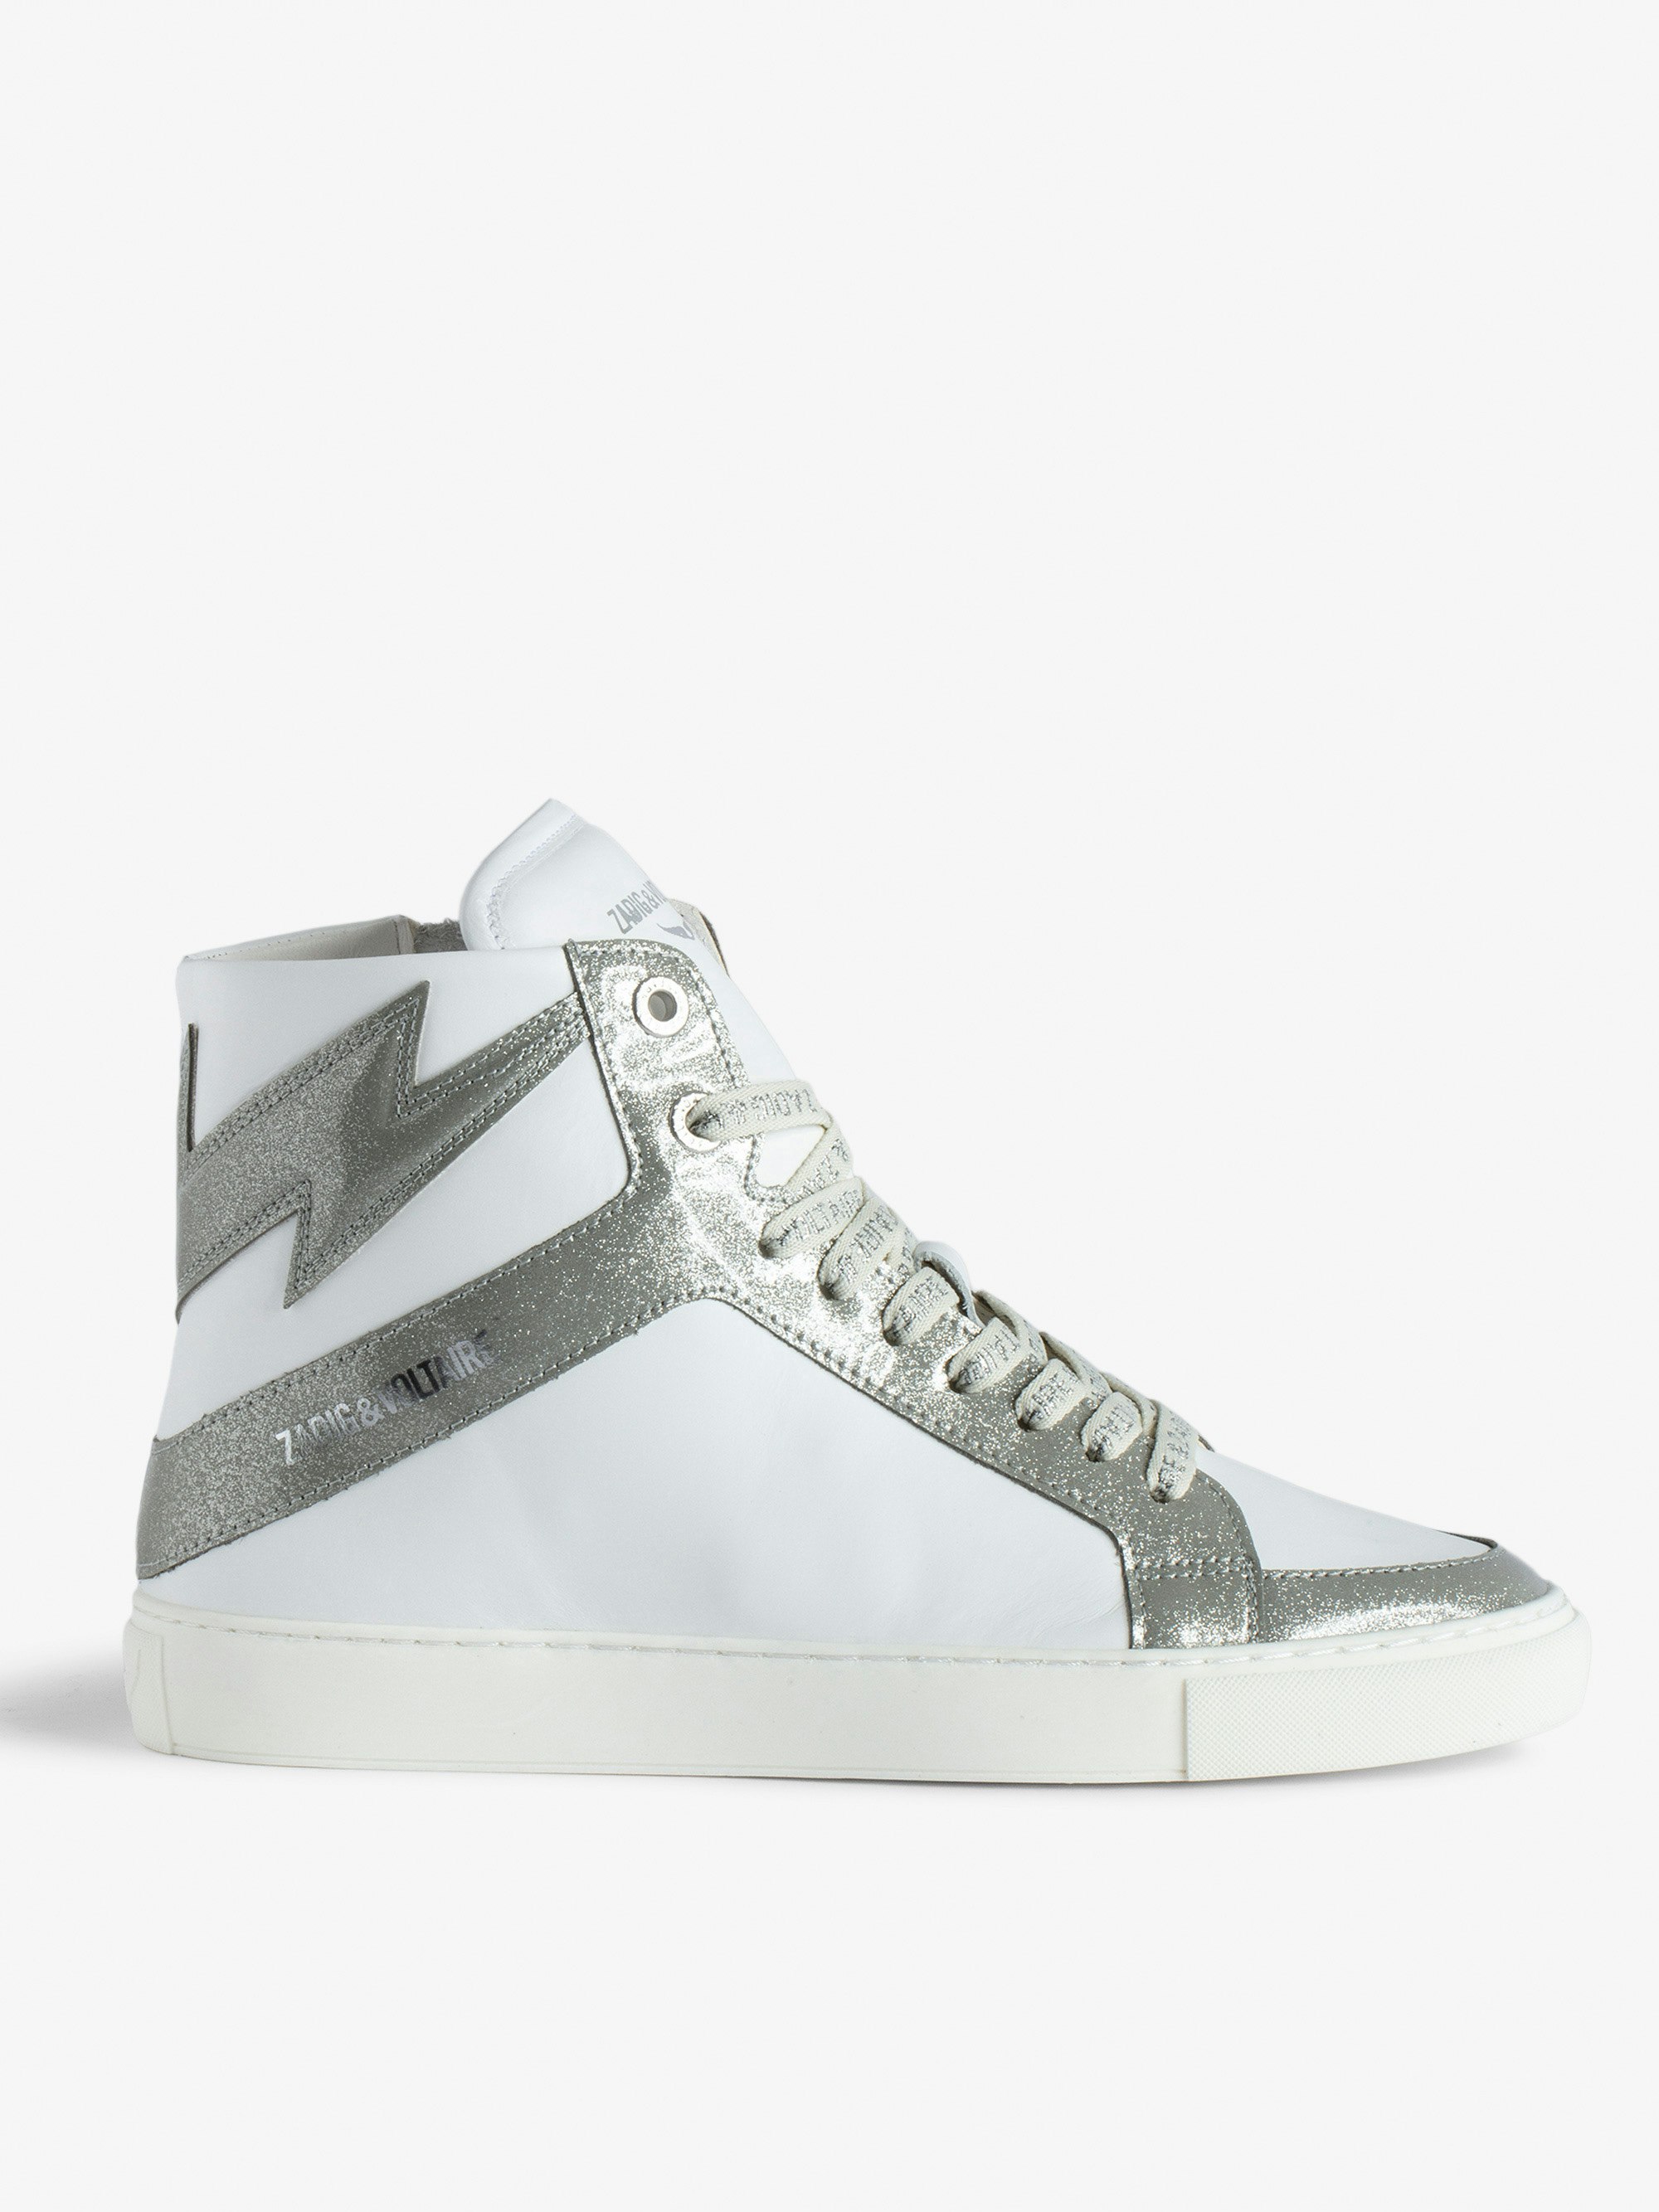 ZV1747 High Flash High-Top Sneakers - Women’s smooth leather and silver glitter high-top sneakers with lightning bolt panel.